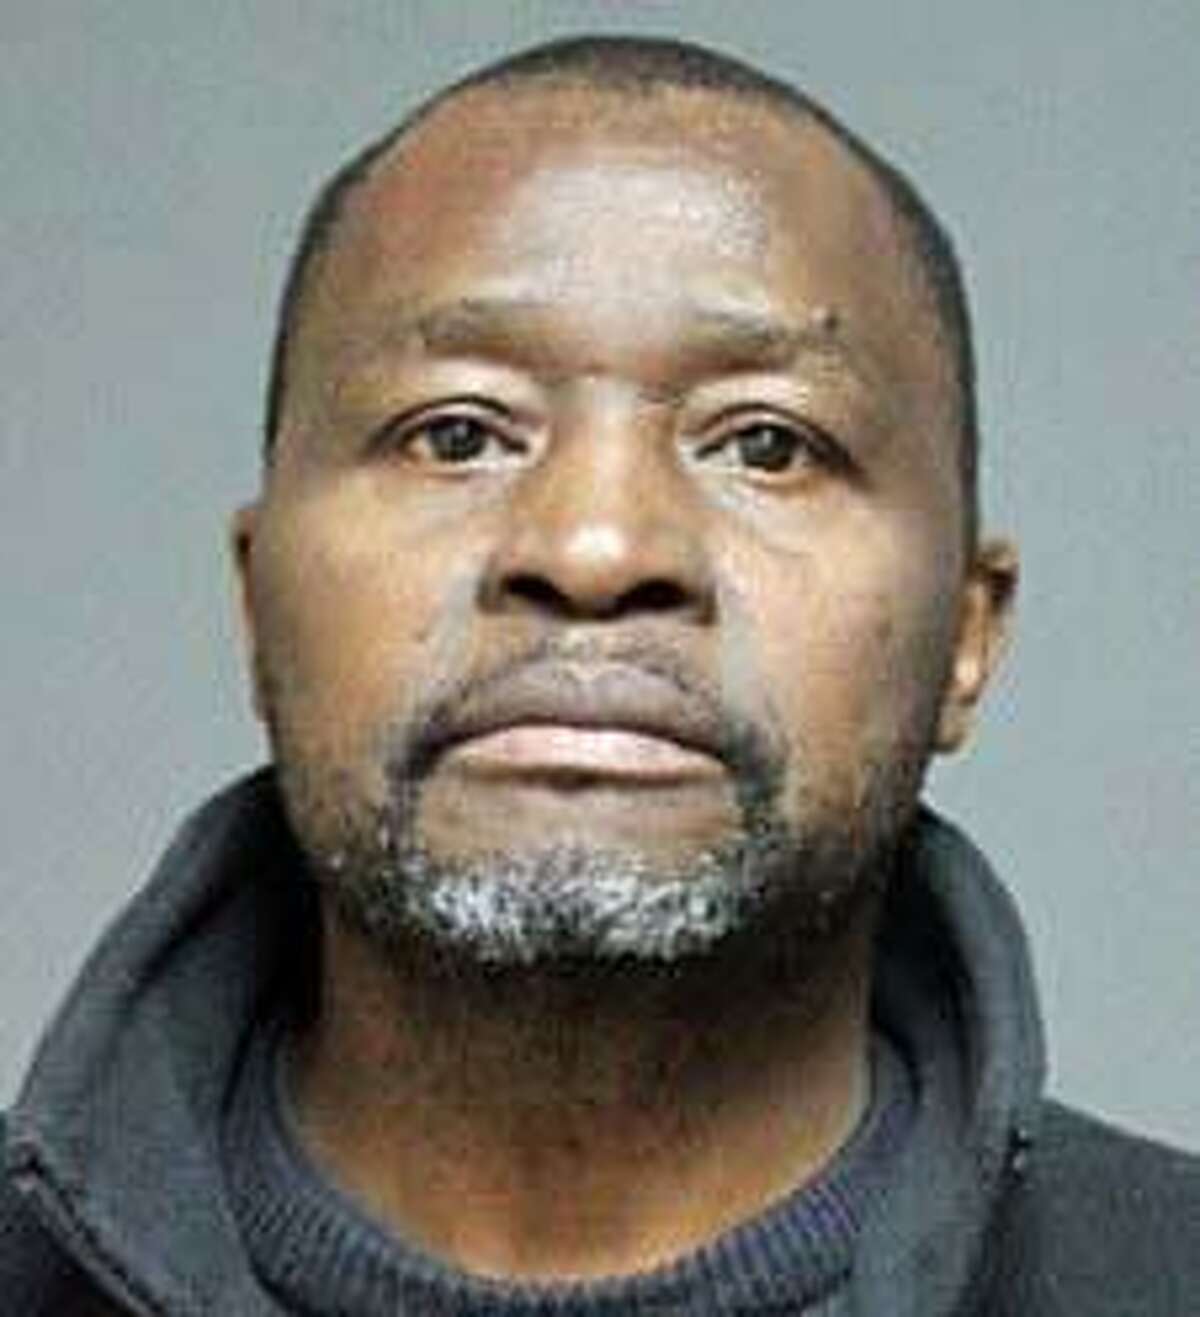 Police have arrested a Bridgeport man who is accused of assaulting a disabled child on a school bus. Joseph Jean-Felix, 68, of Salem Street in Bridgeport, was arrested on a warrant charging him with the crimes of five counts each of assault of an intellectually disabled person, first-degree unlawful restraint and risk of injury to to a minor.